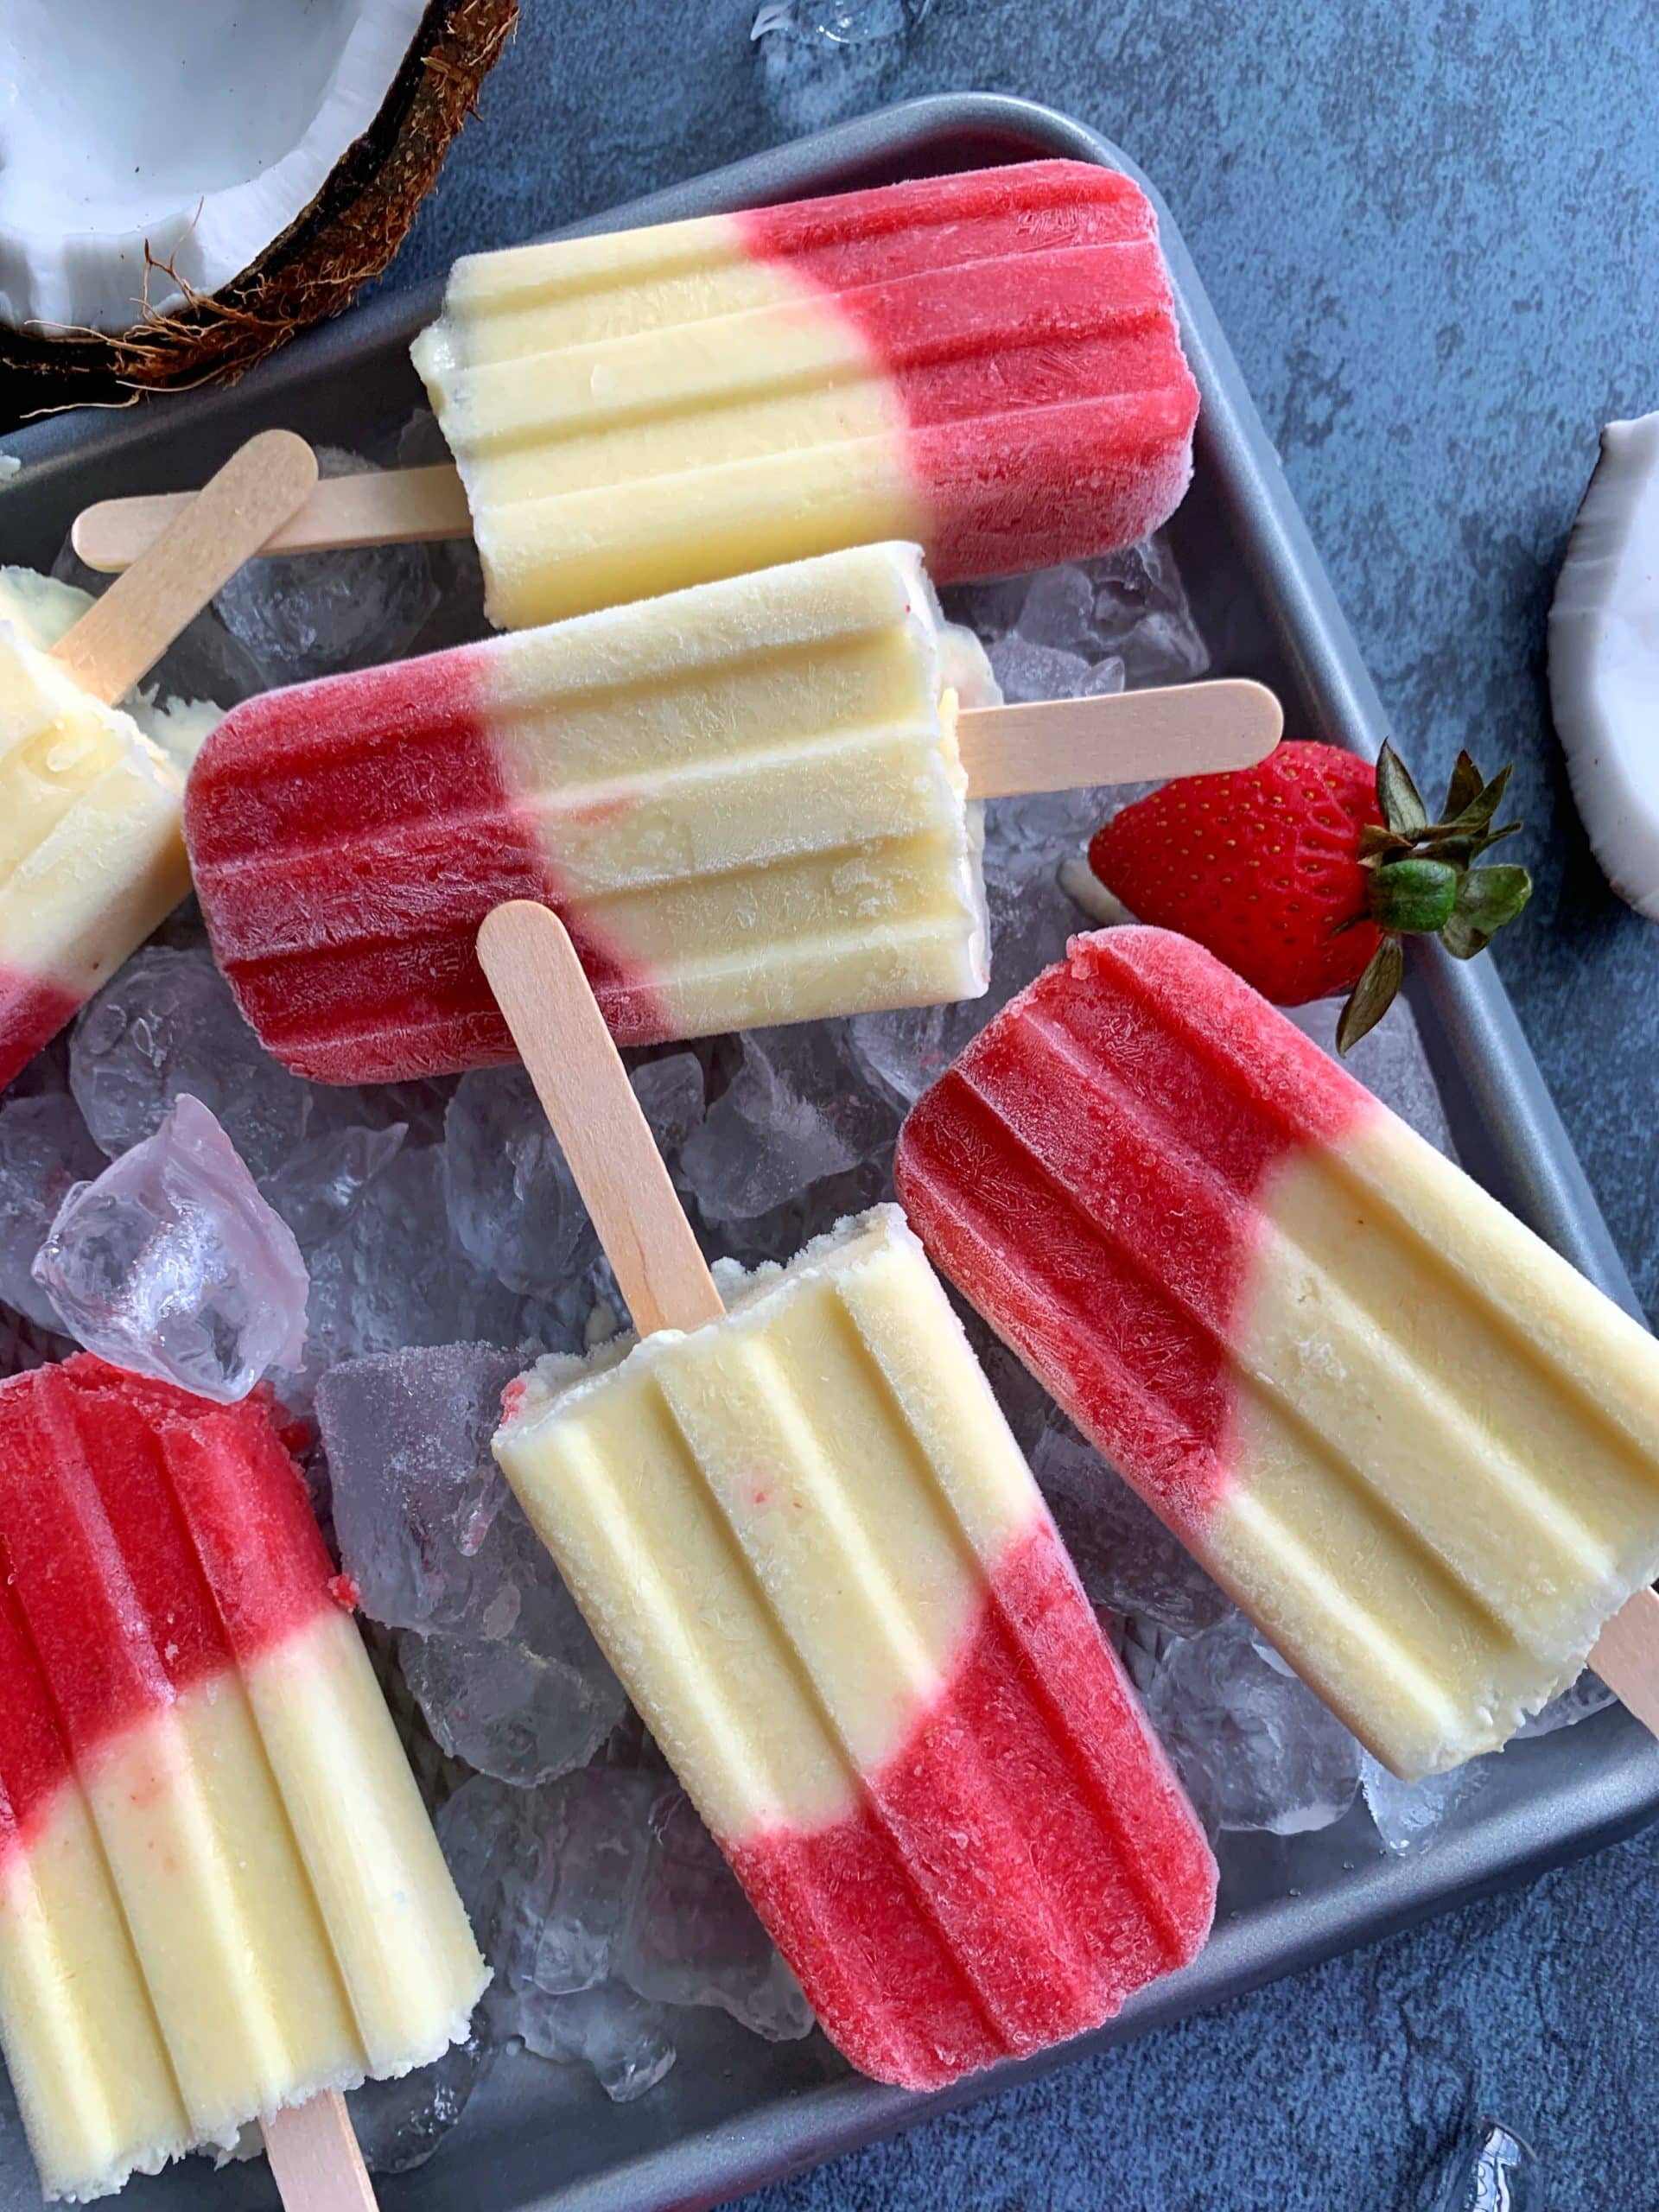 Homemade Miami Vice Popsicles